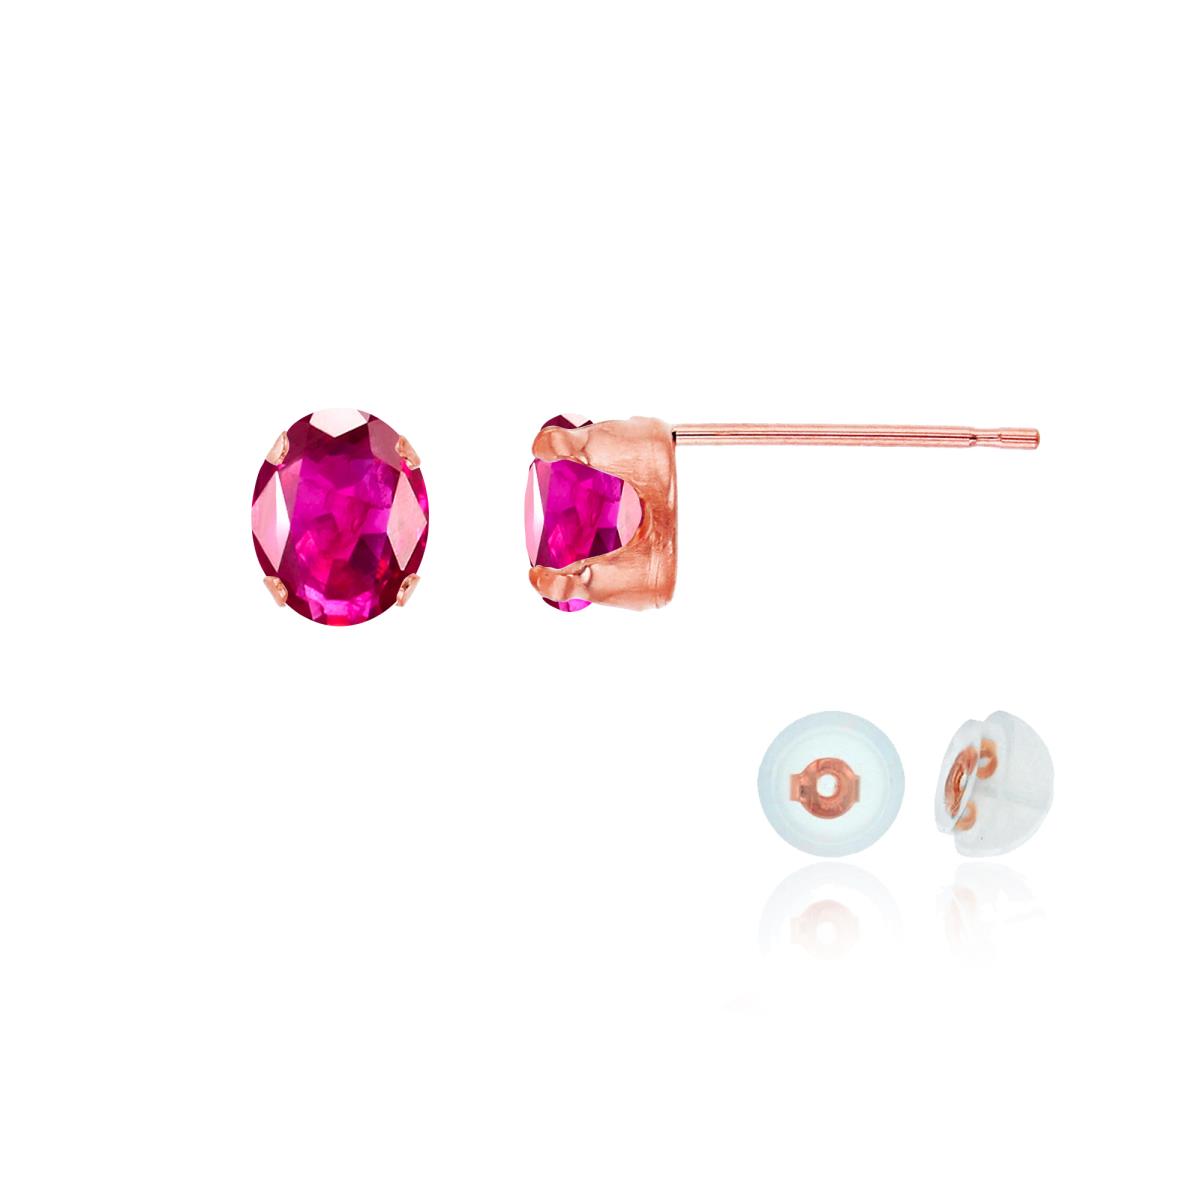 10K Rose Gold 6x4mm Oval Glass Filled Ruby Stud Earring with Silicone Back